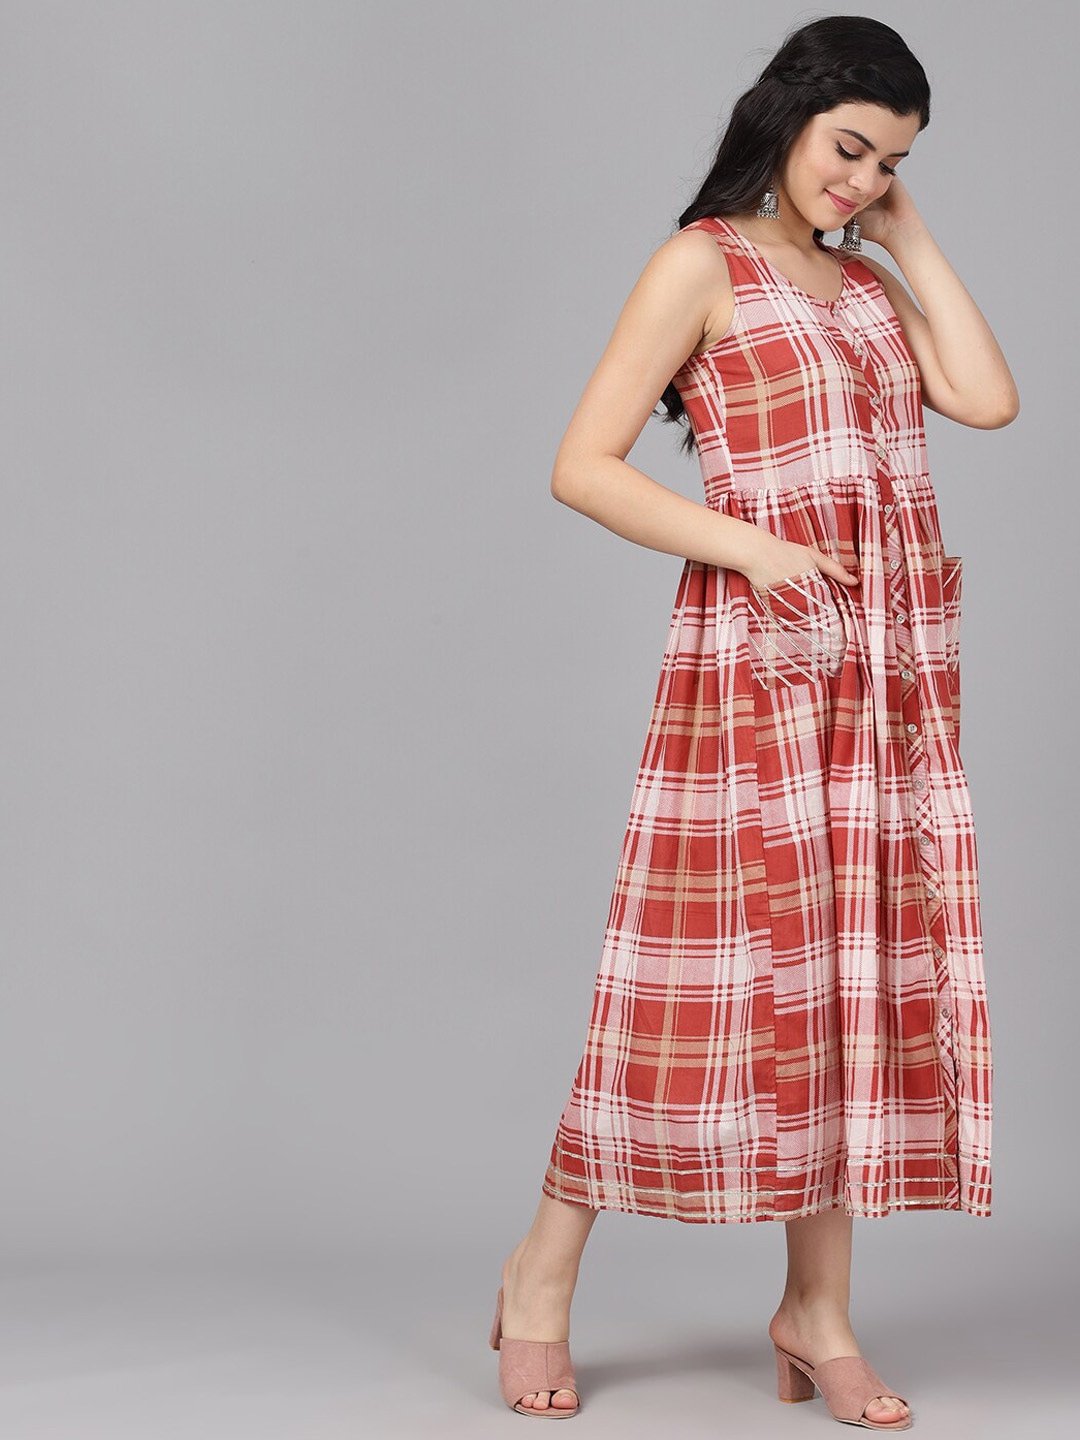 Women's  Rust Red & Off-White Checked A-Line Dress - AKS